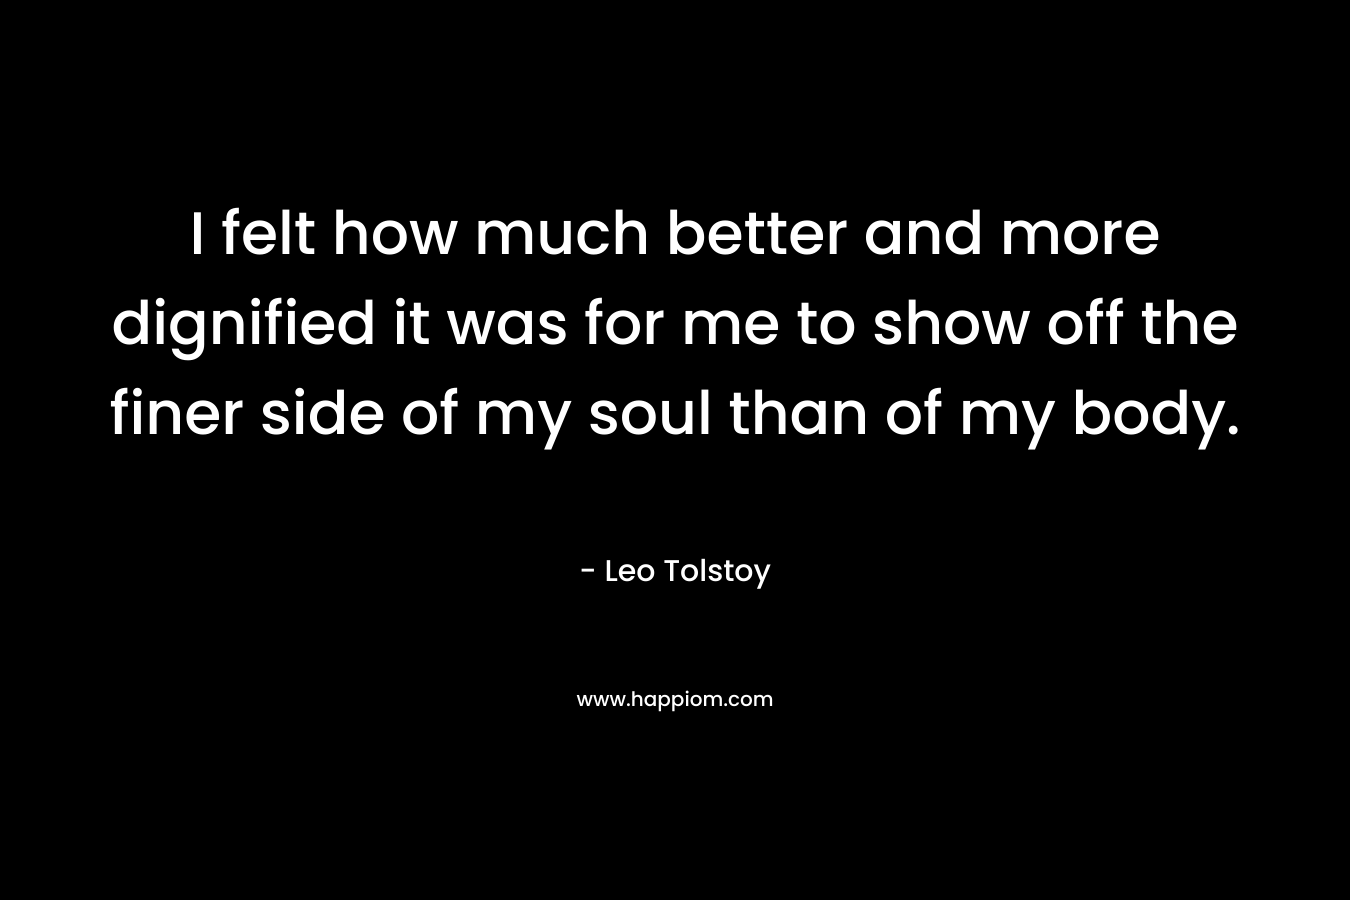 I felt how much better and more dignified it was for me to show off the finer side of my soul than of my body. – Leo Tolstoy